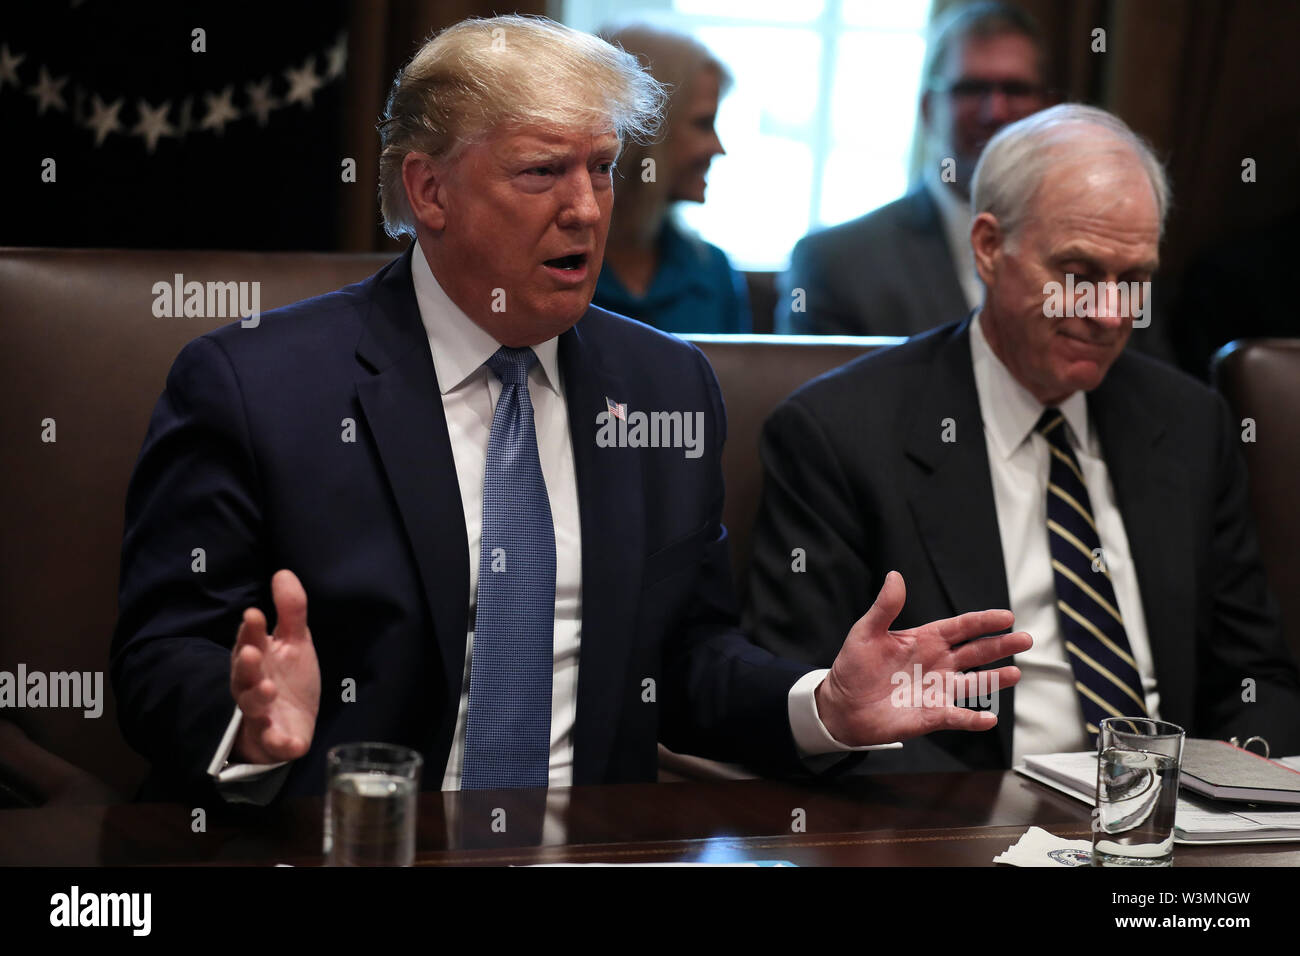 United States President Donald J. Trump joined by Acting US Secretary of Defense Richard V. Spencer, speaks during a Cabinet Meeting in the Cabinet Room of the White House, on July 16, 2019 in Washington, DC.Credit: Oliver Contreras/Pool via CNP/MediaPunch Stock Photo